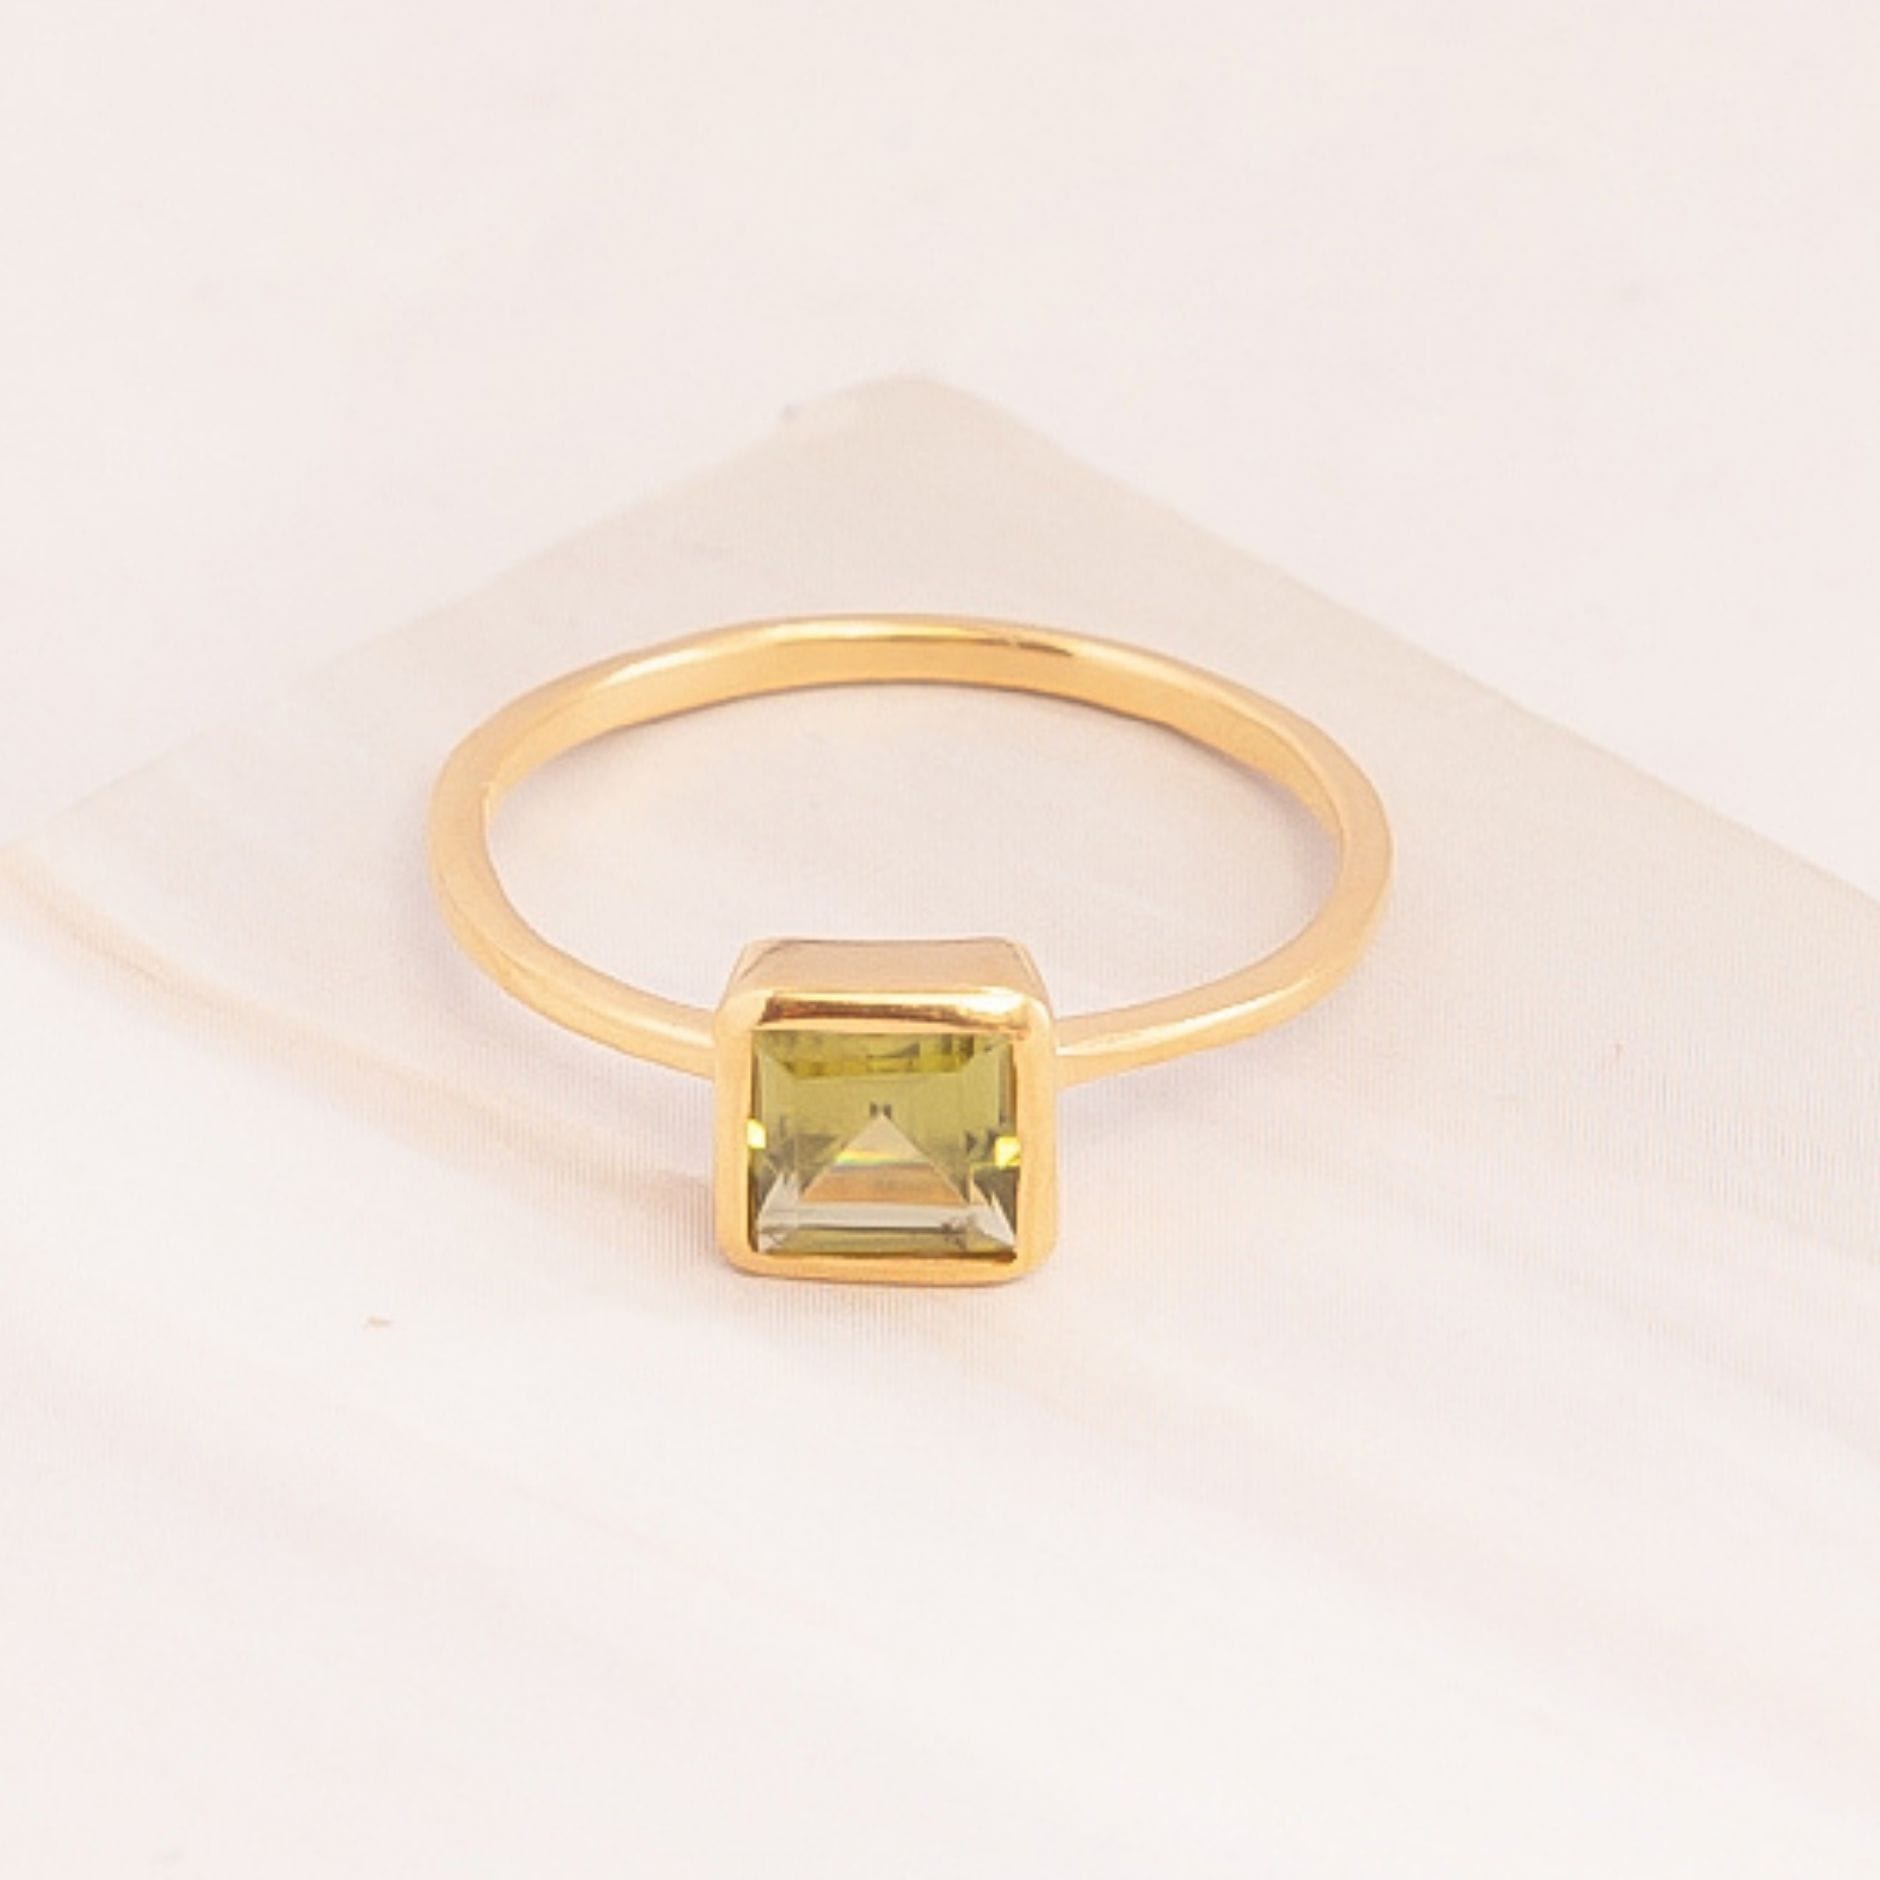 Emblem Jewelry Rings Green Peridot / Square Signature Candy Gemstone Stack Rings (Ring Size 9)